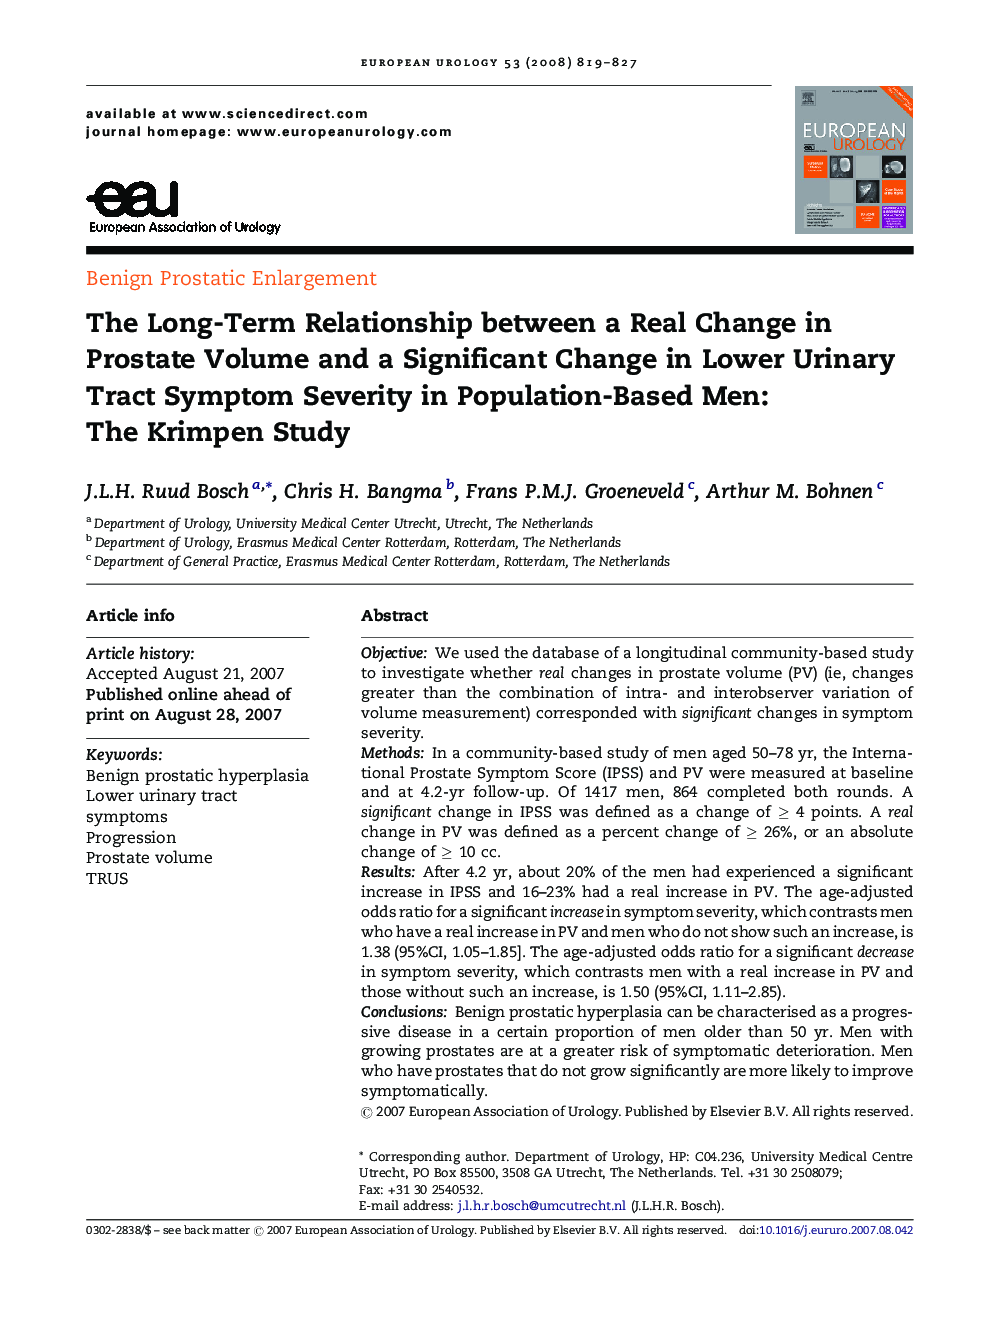 The Long-Term Relationship between a Real Change in Prostate Volume and a Significant Change in Lower Urinary Tract Symptom Severity in Population-Based Men: The Krimpen Study